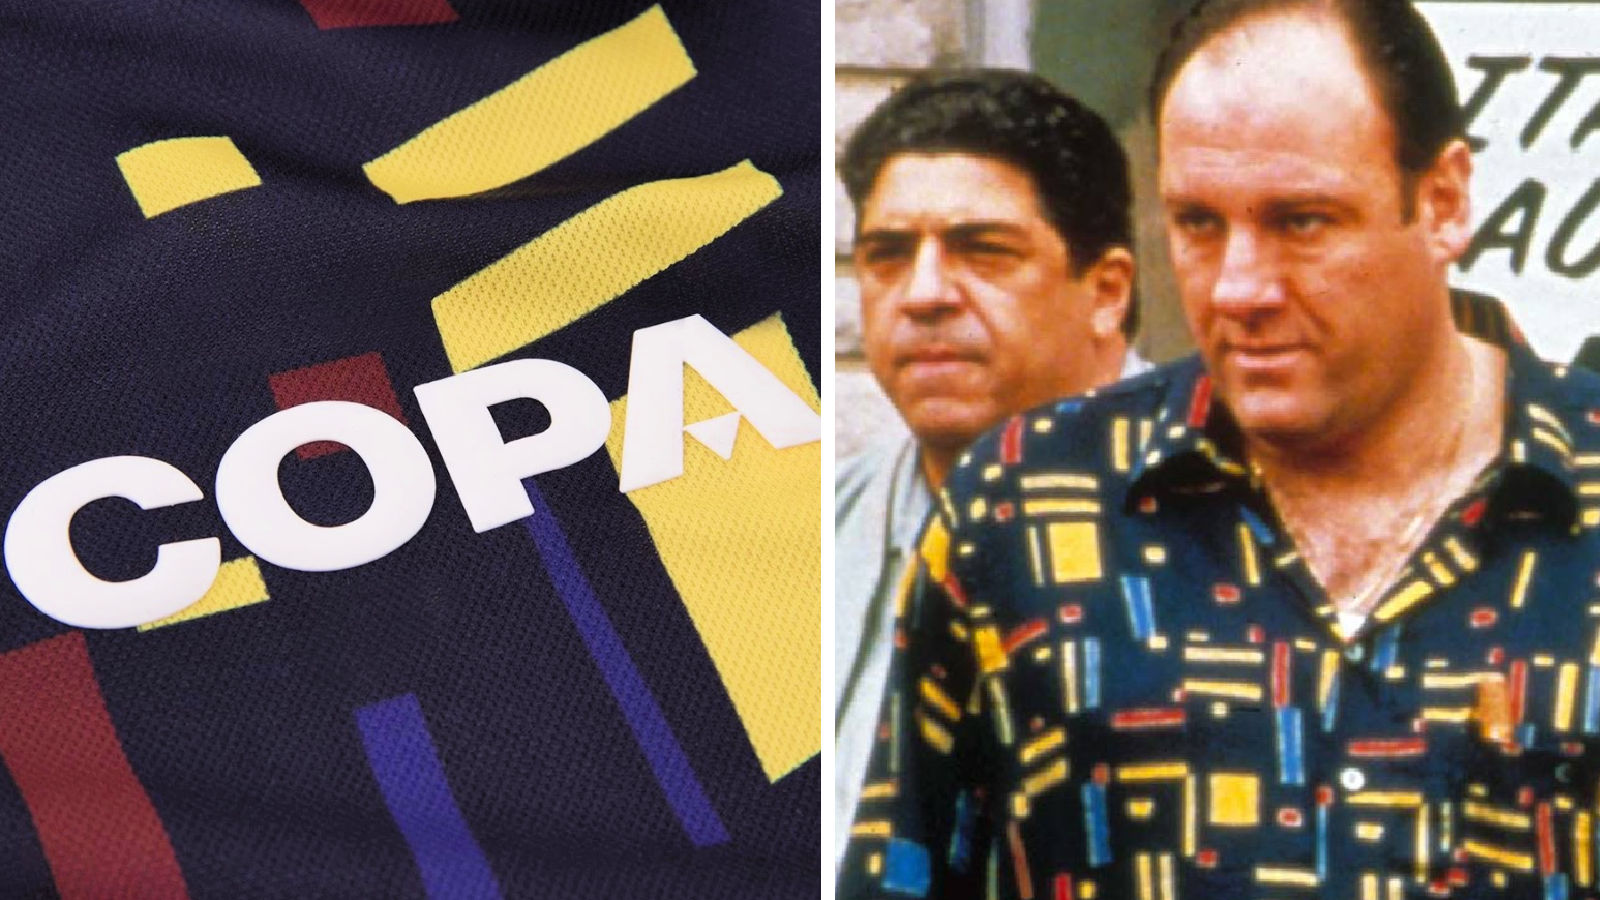 Copa Football pay tribute to The Sopranos